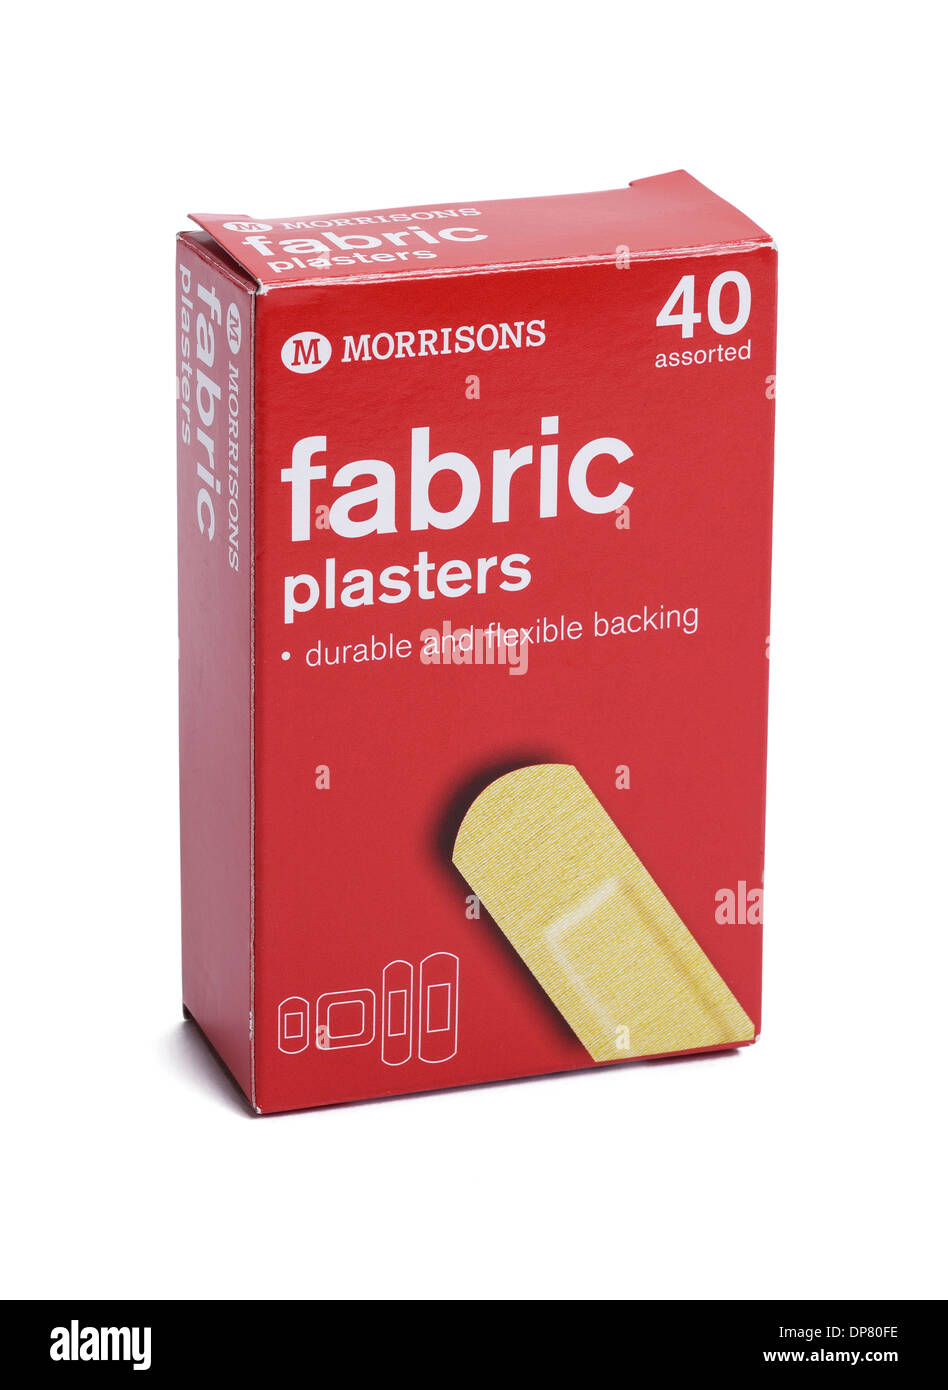 Box of Morrisons own brand fabric plasters Stock Photo